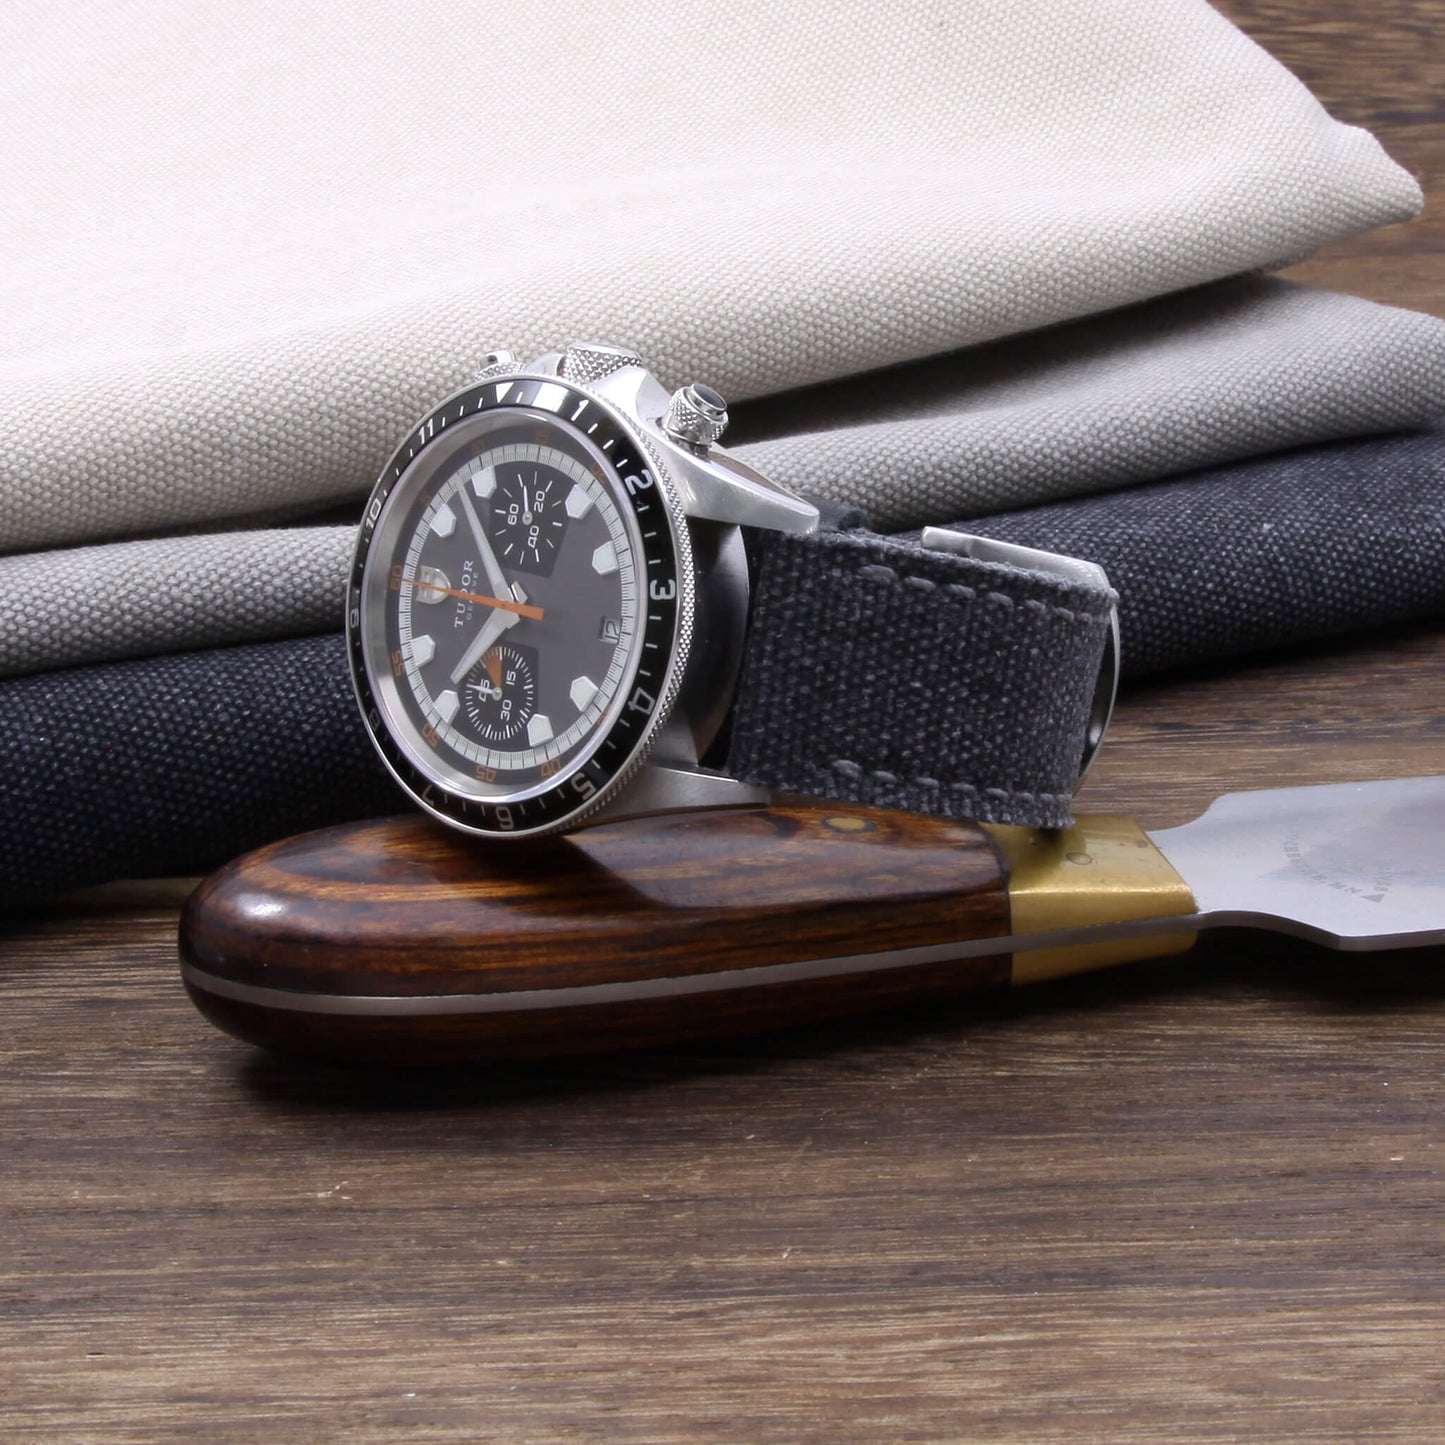 6th View of 2-Piece Full Stitch Leather Watch Strap, made with Stone Washed Black Canvas and Italian veg-tanned leather lining, handcrafted by Cozy Handmade